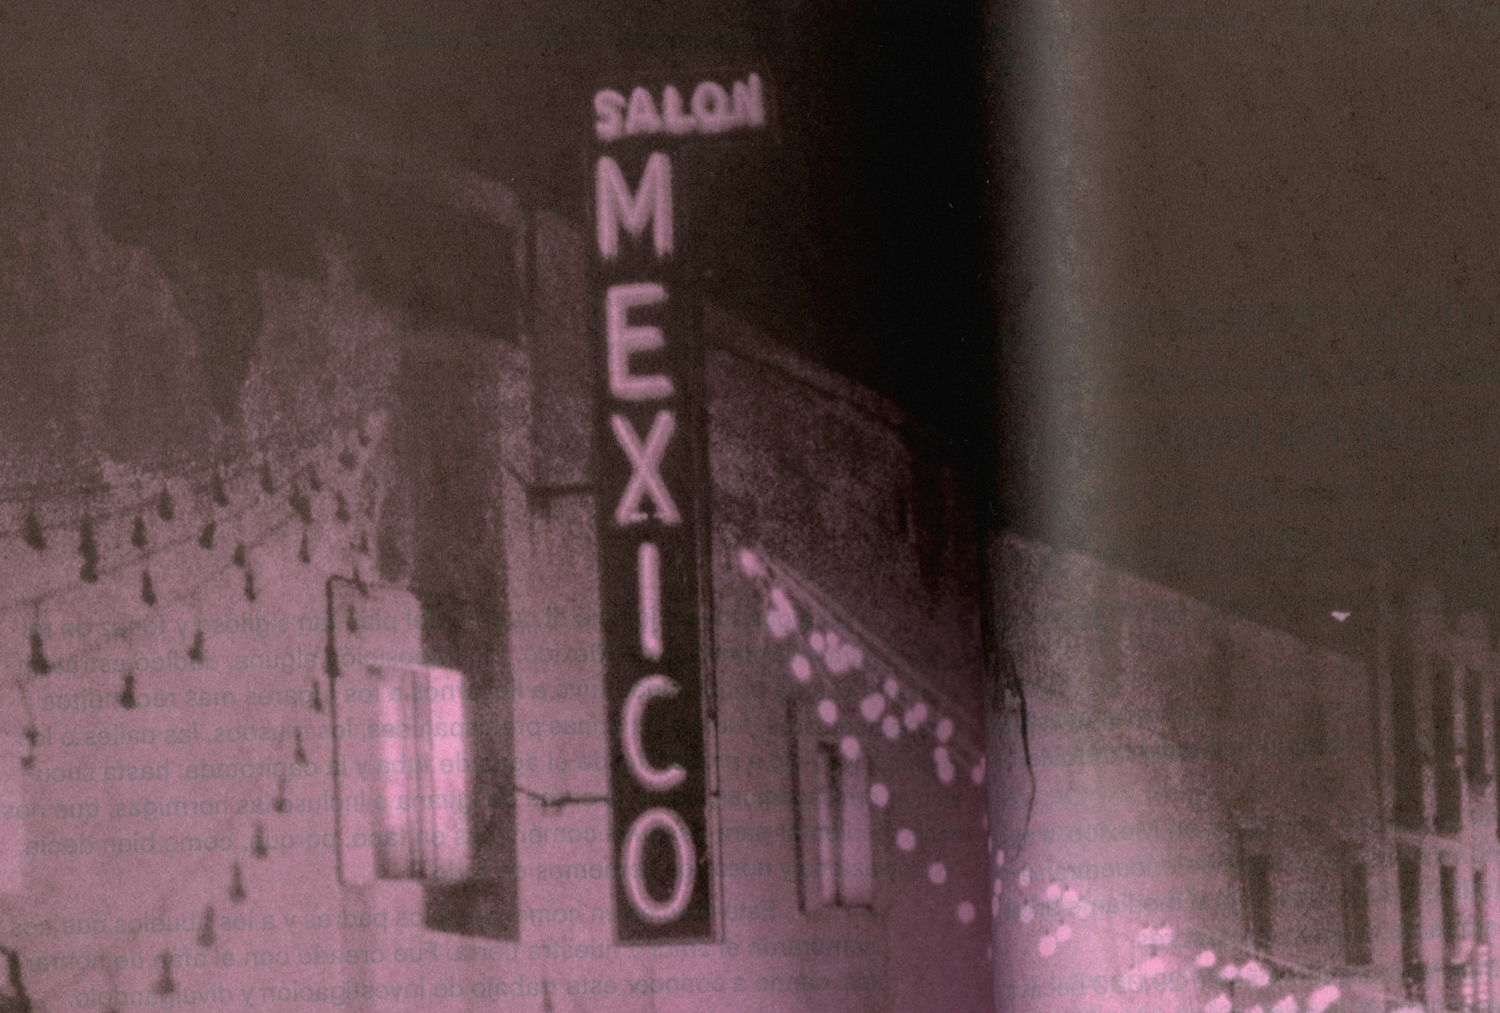 A new book on Mexican culture designed by Canadian studio Blok